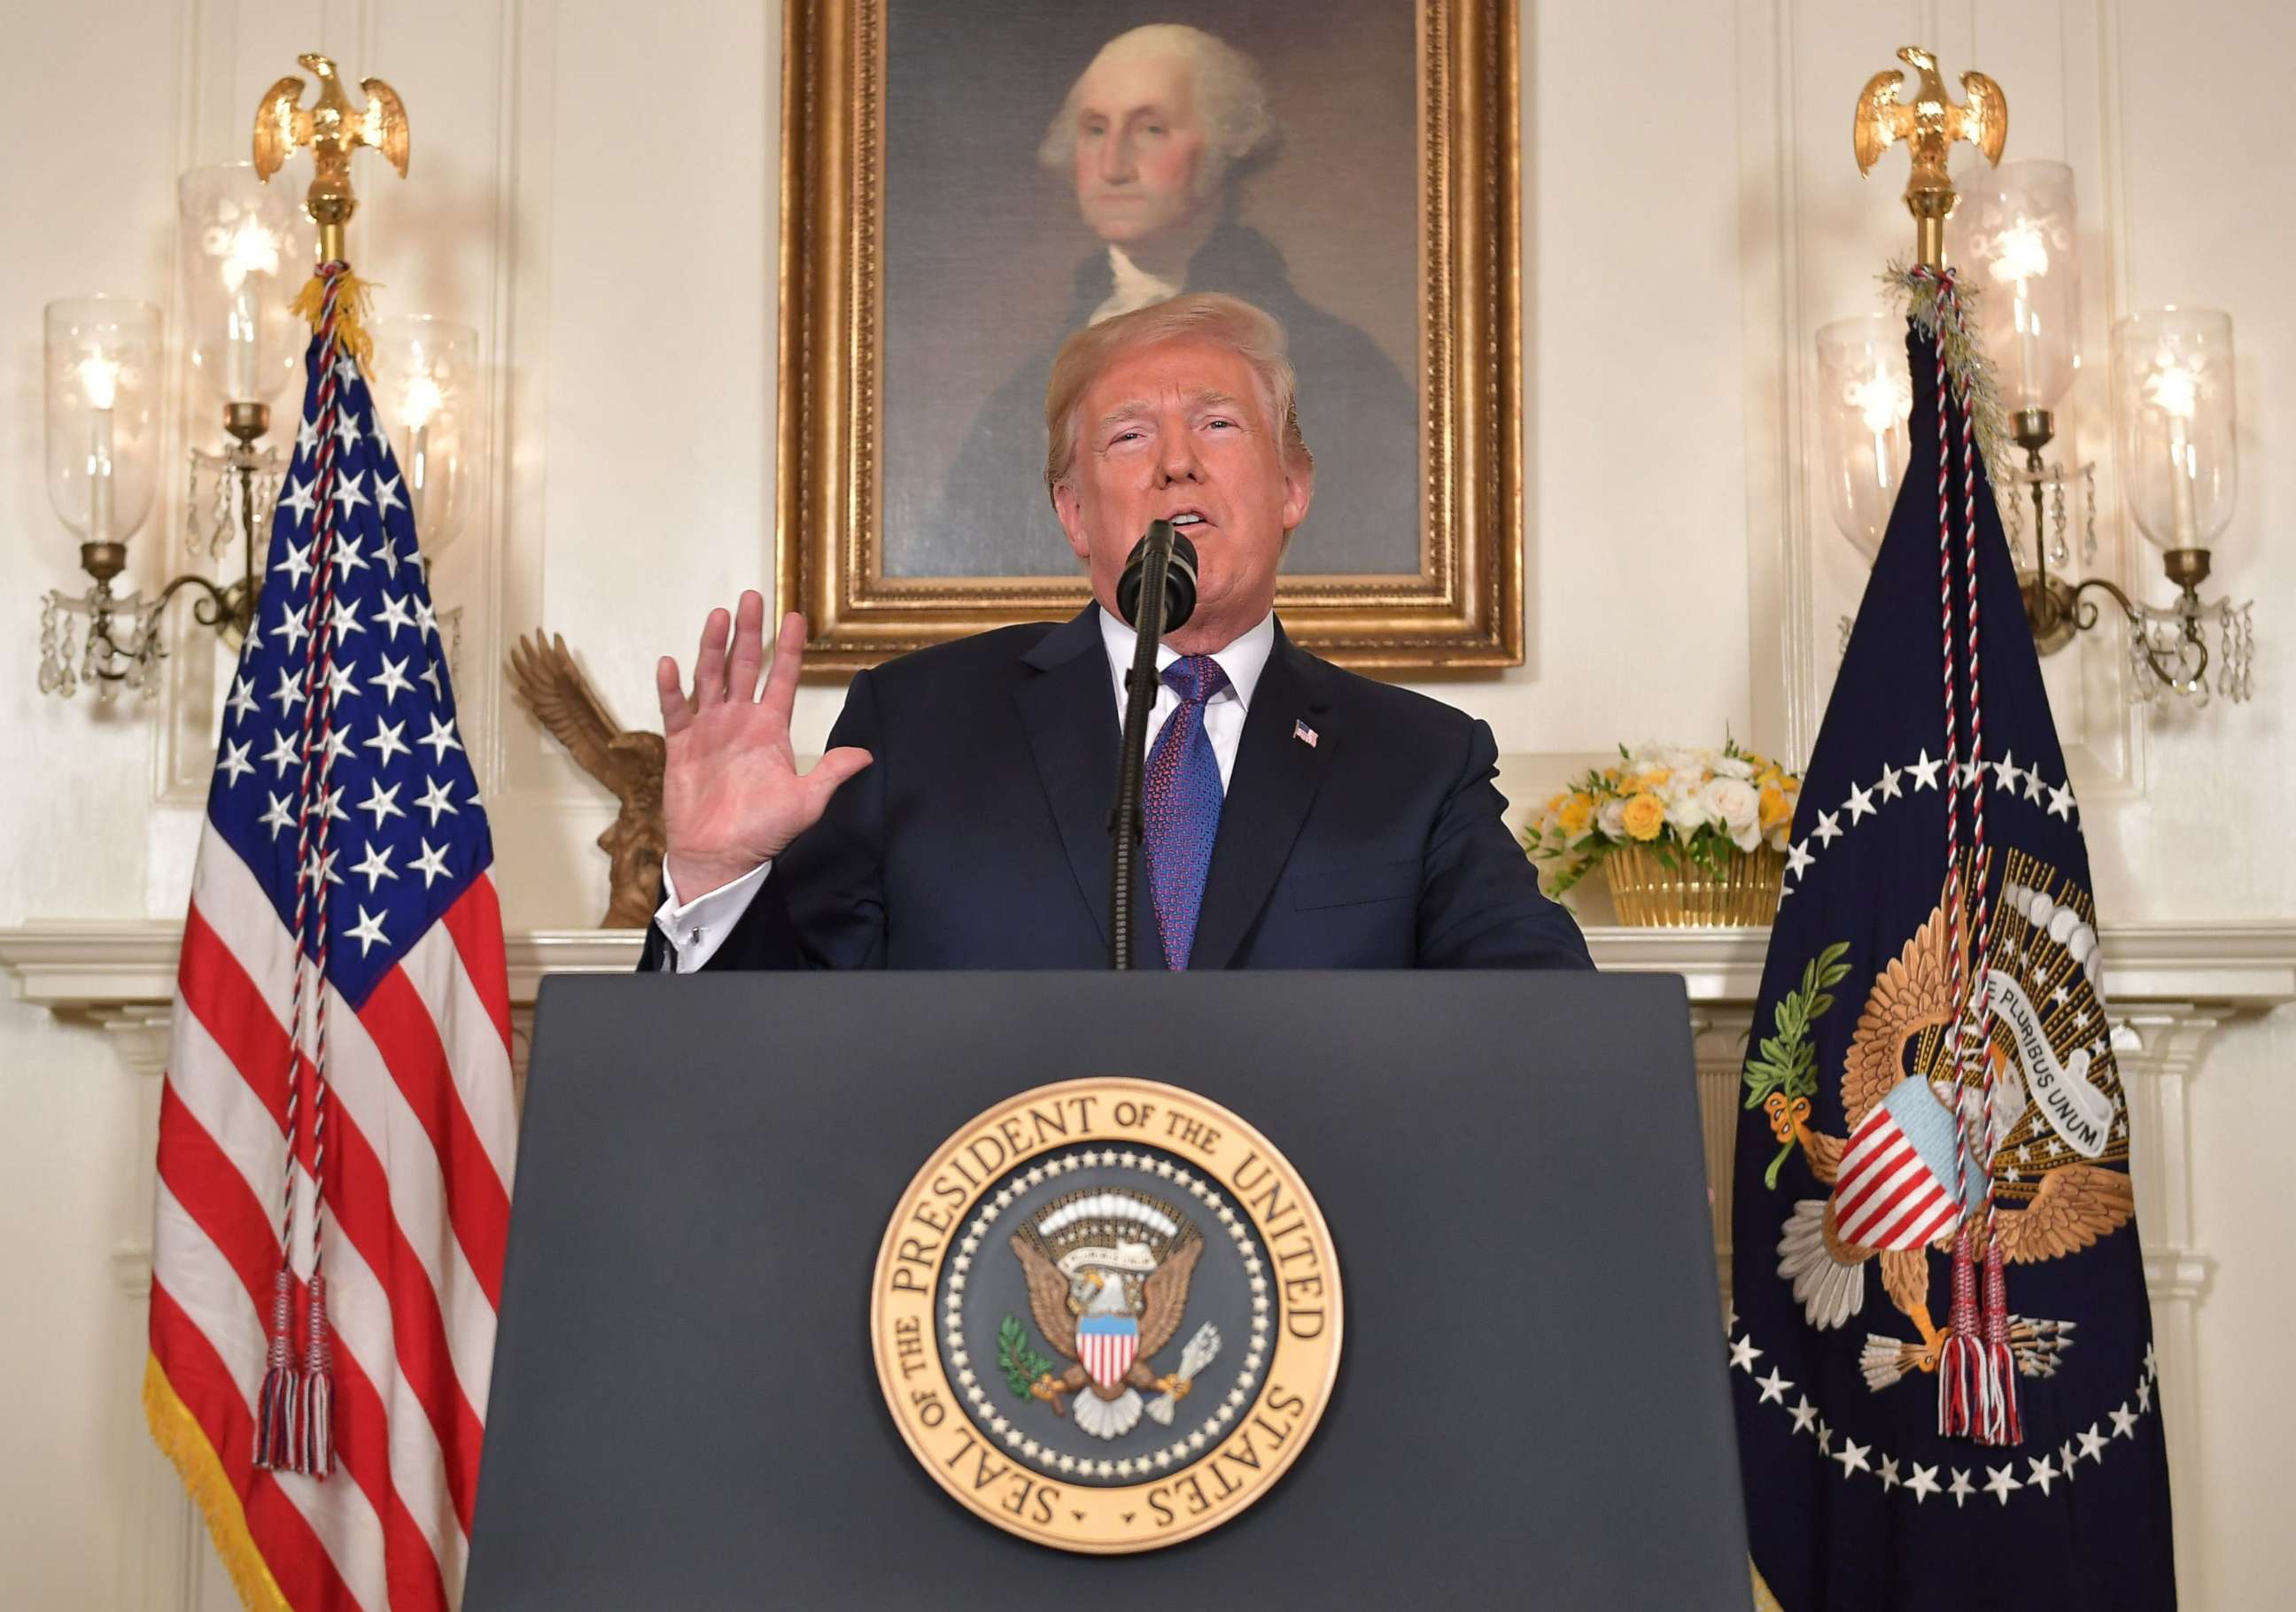 PHOTO: President Donald Trump addresses the nation on the situation in Syria April 13, 2018 at the White House in Washington. Trump said strikes on Syria are under way.